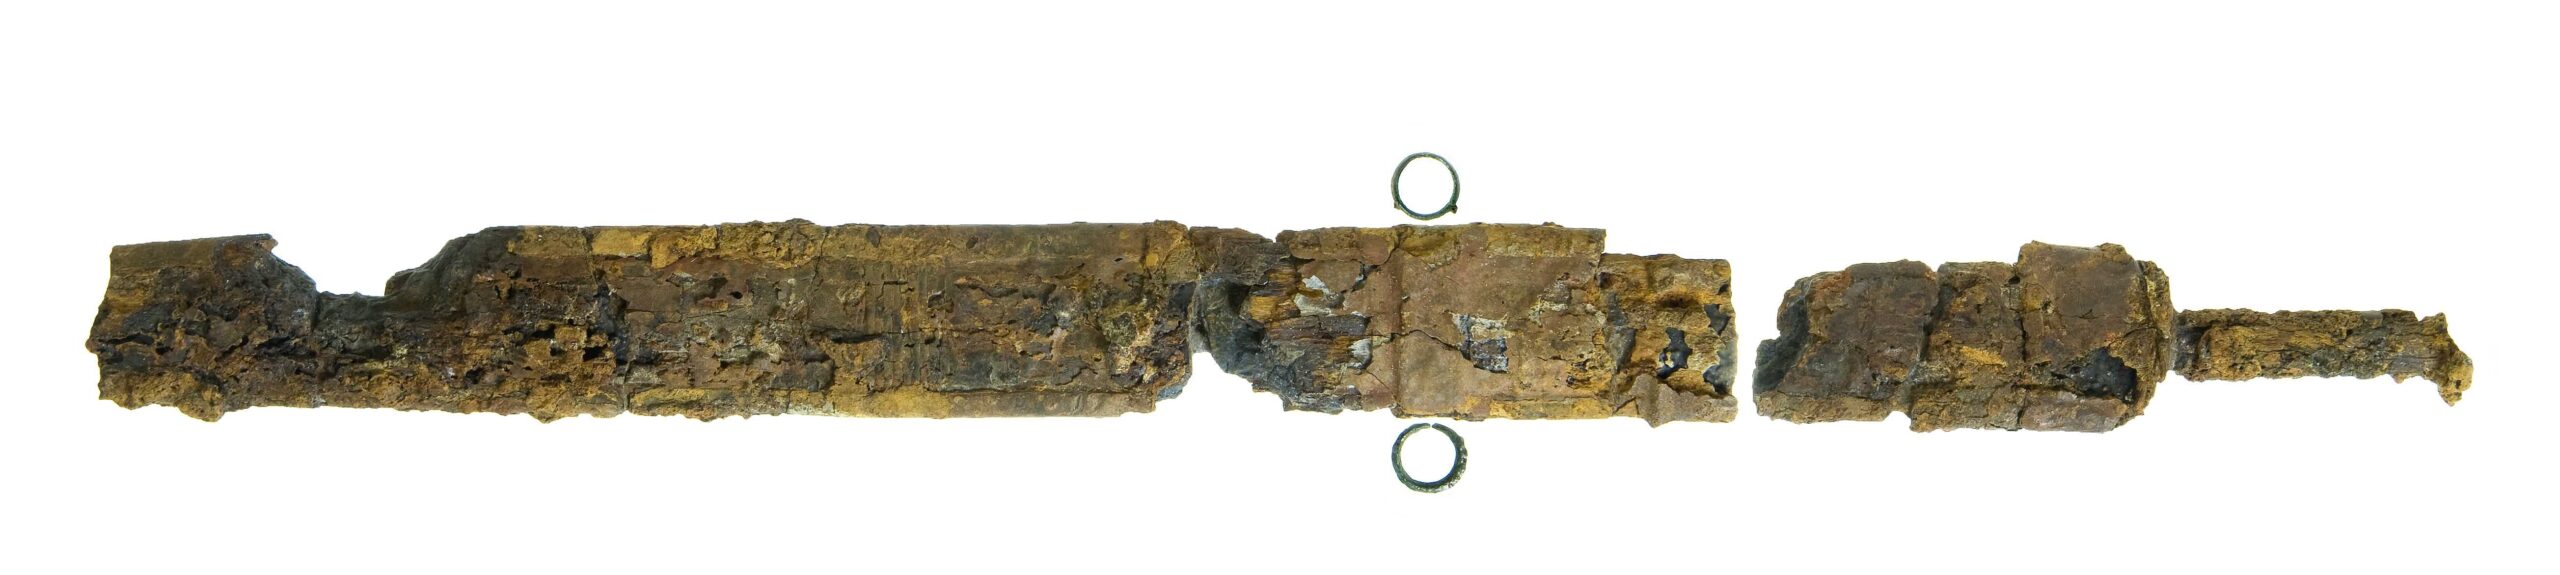 A 2,000 year old sword. Photo: Clara Amit, Antiquities Authority